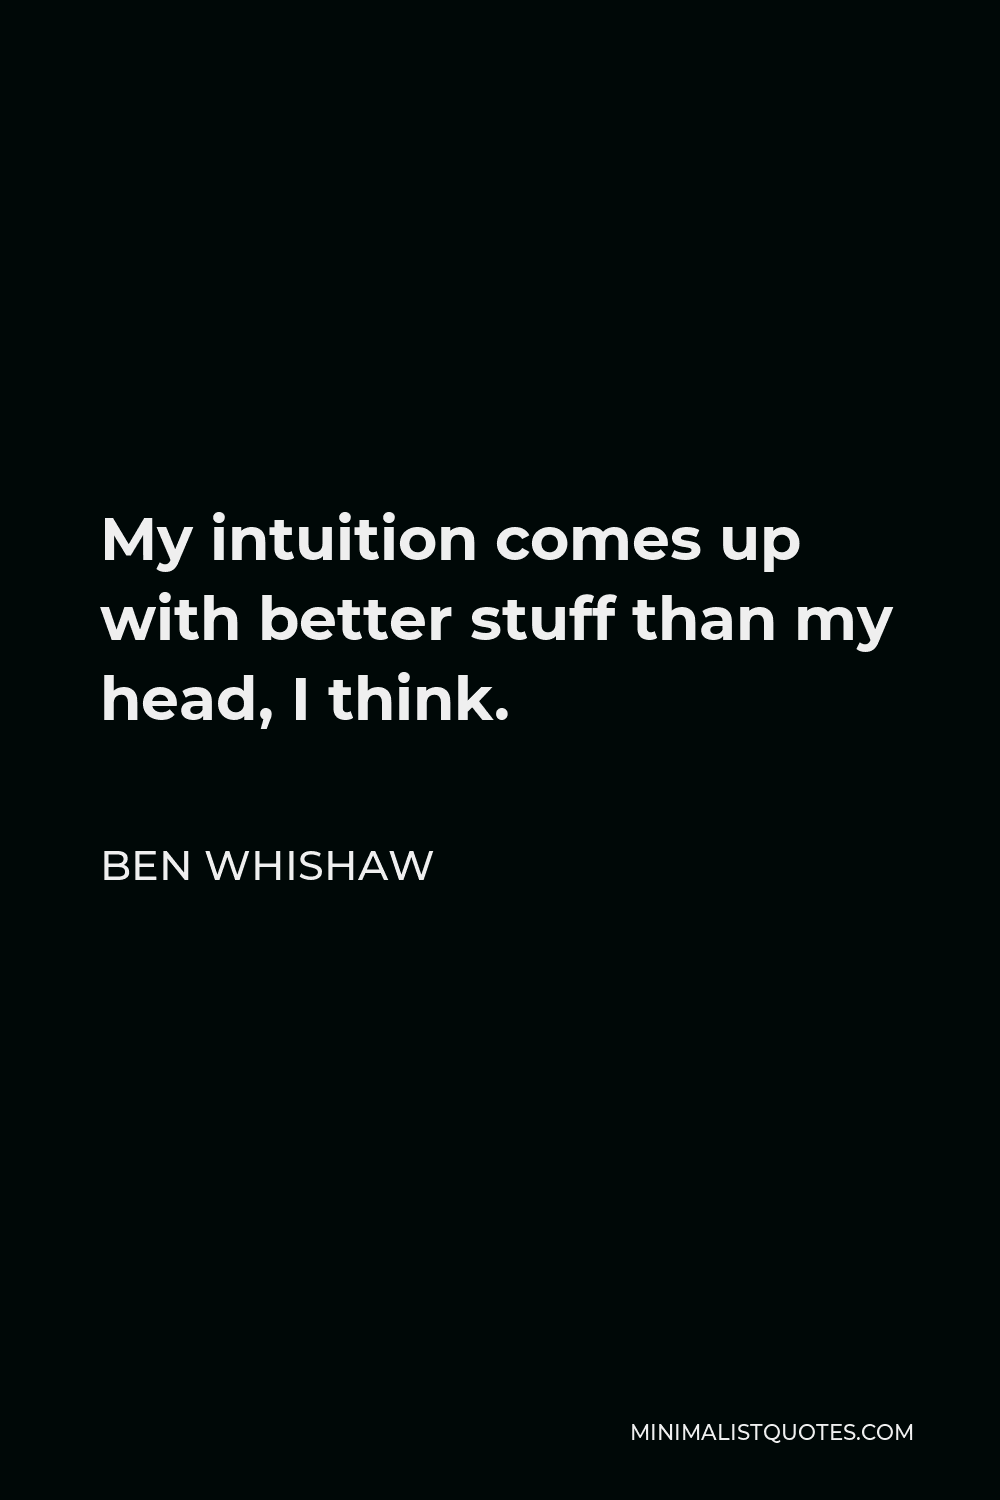 Ben Whishaw Quote - My intuition comes up with better stuff than my head, I think.